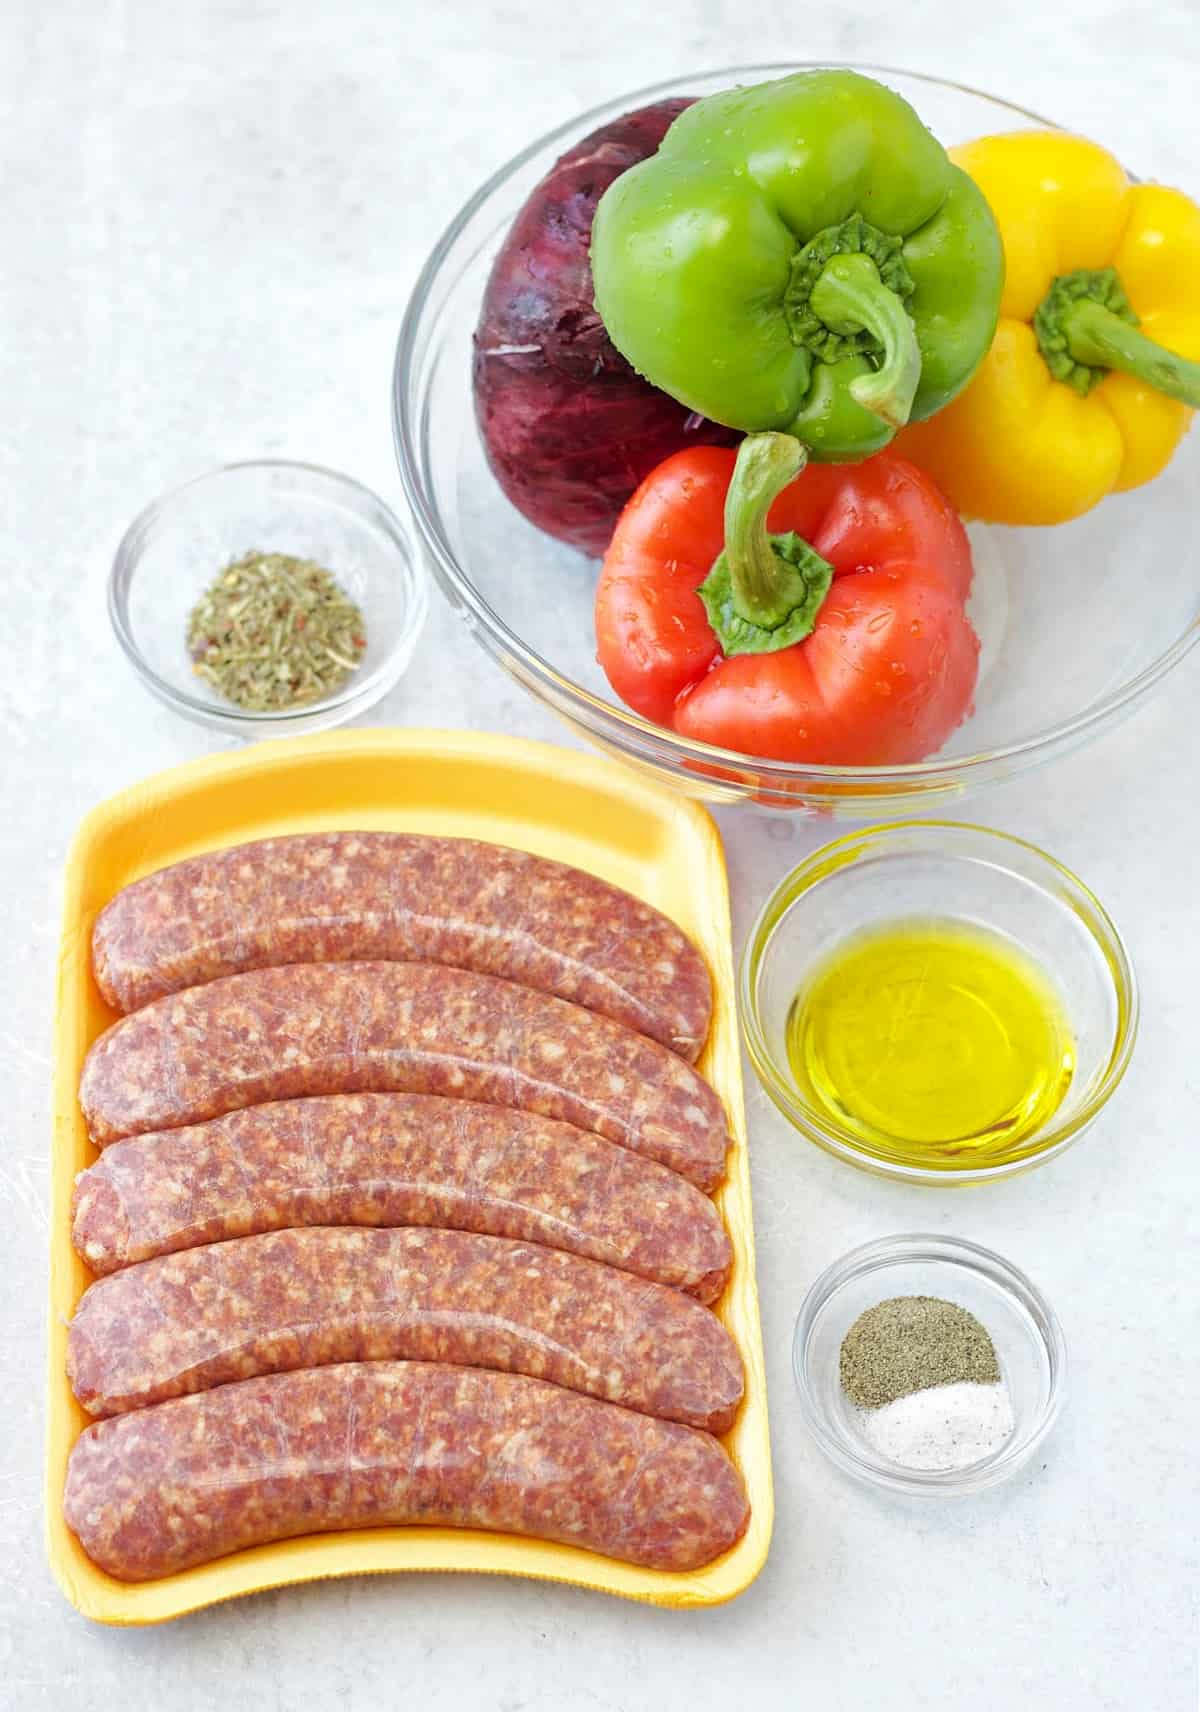 ingredients needed to make air fryer Italian sausages like raw pork sausage, Italian seasoning herb blend, olive oil, salt, black pepper, red onion, and bell peppers in separate bowls.